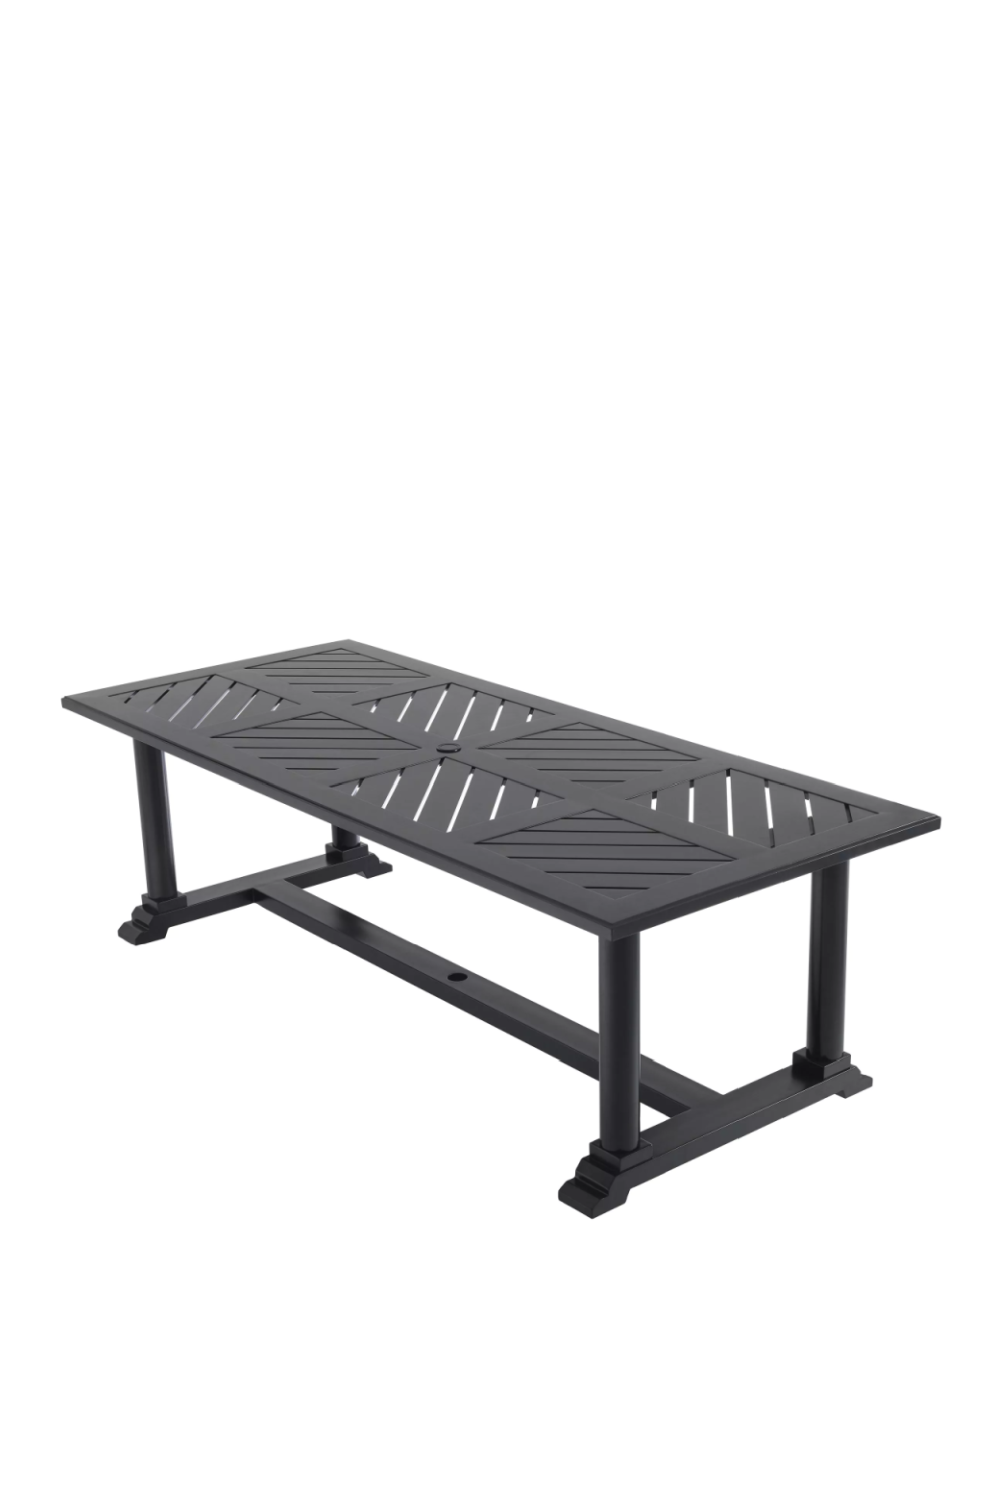 Black Outdoor Dining Table | Eichholtz Bell Rive | Oroa.com